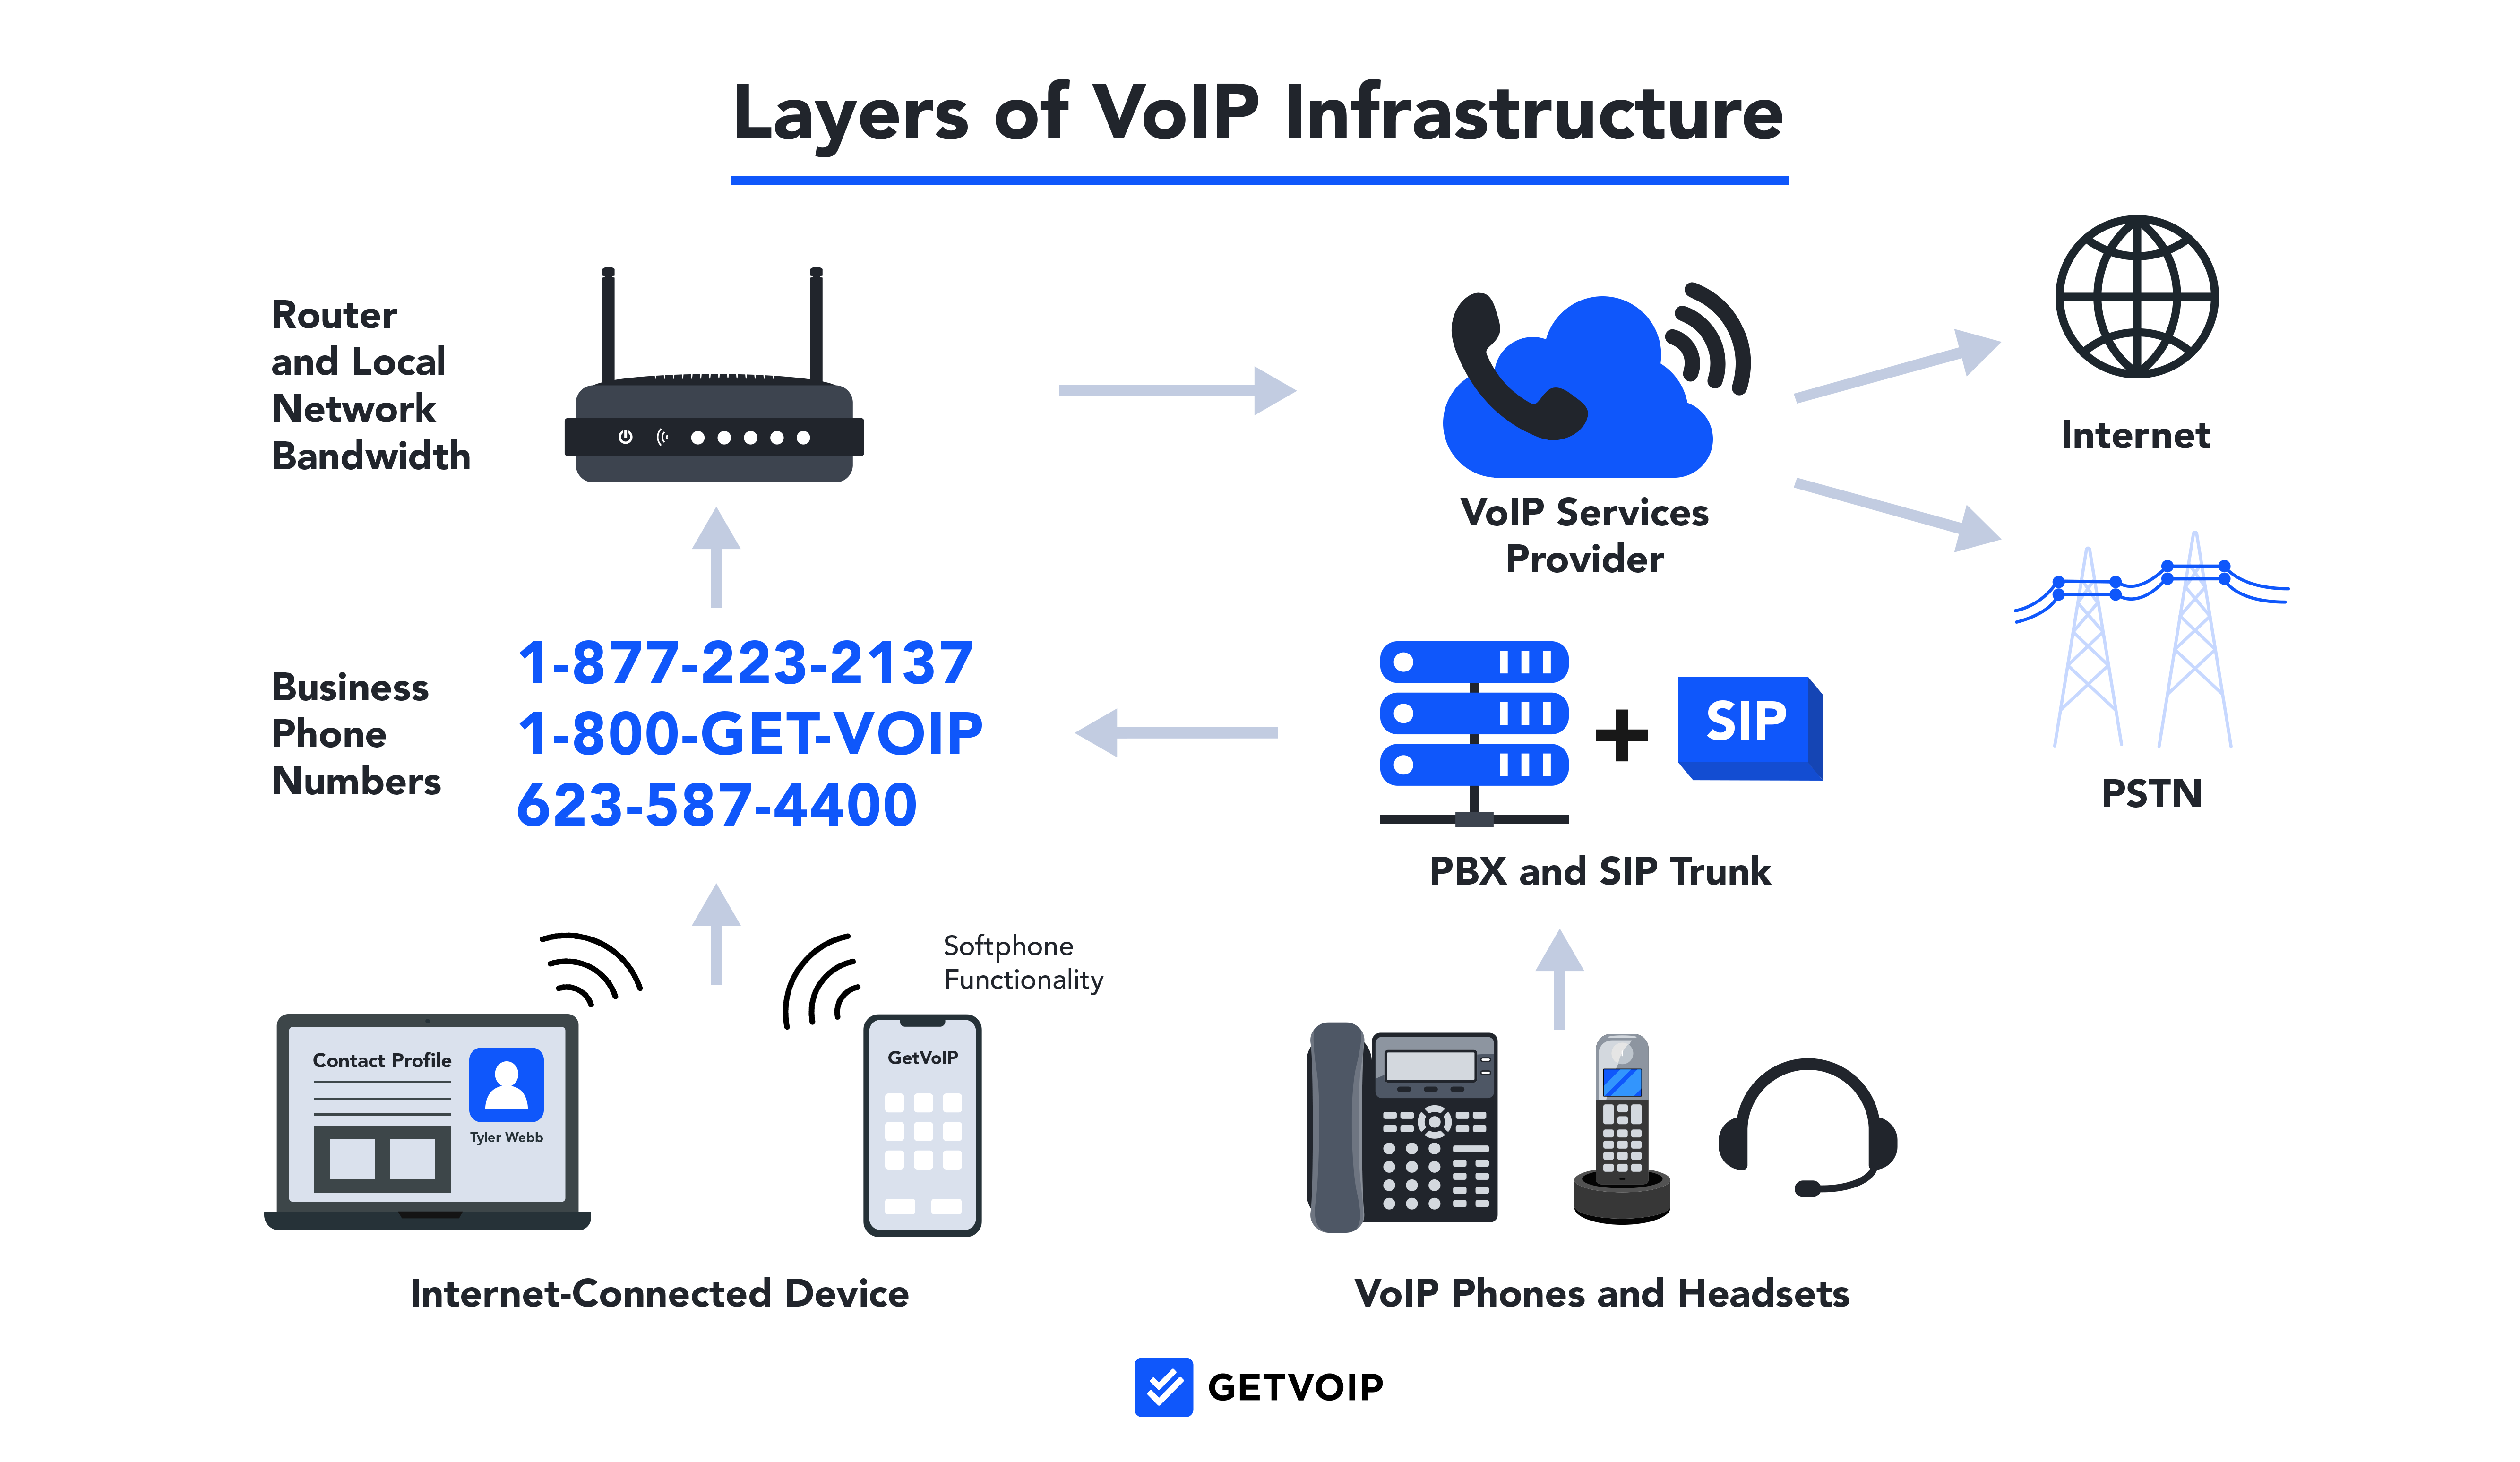 Layers of VoIP Infrastructure